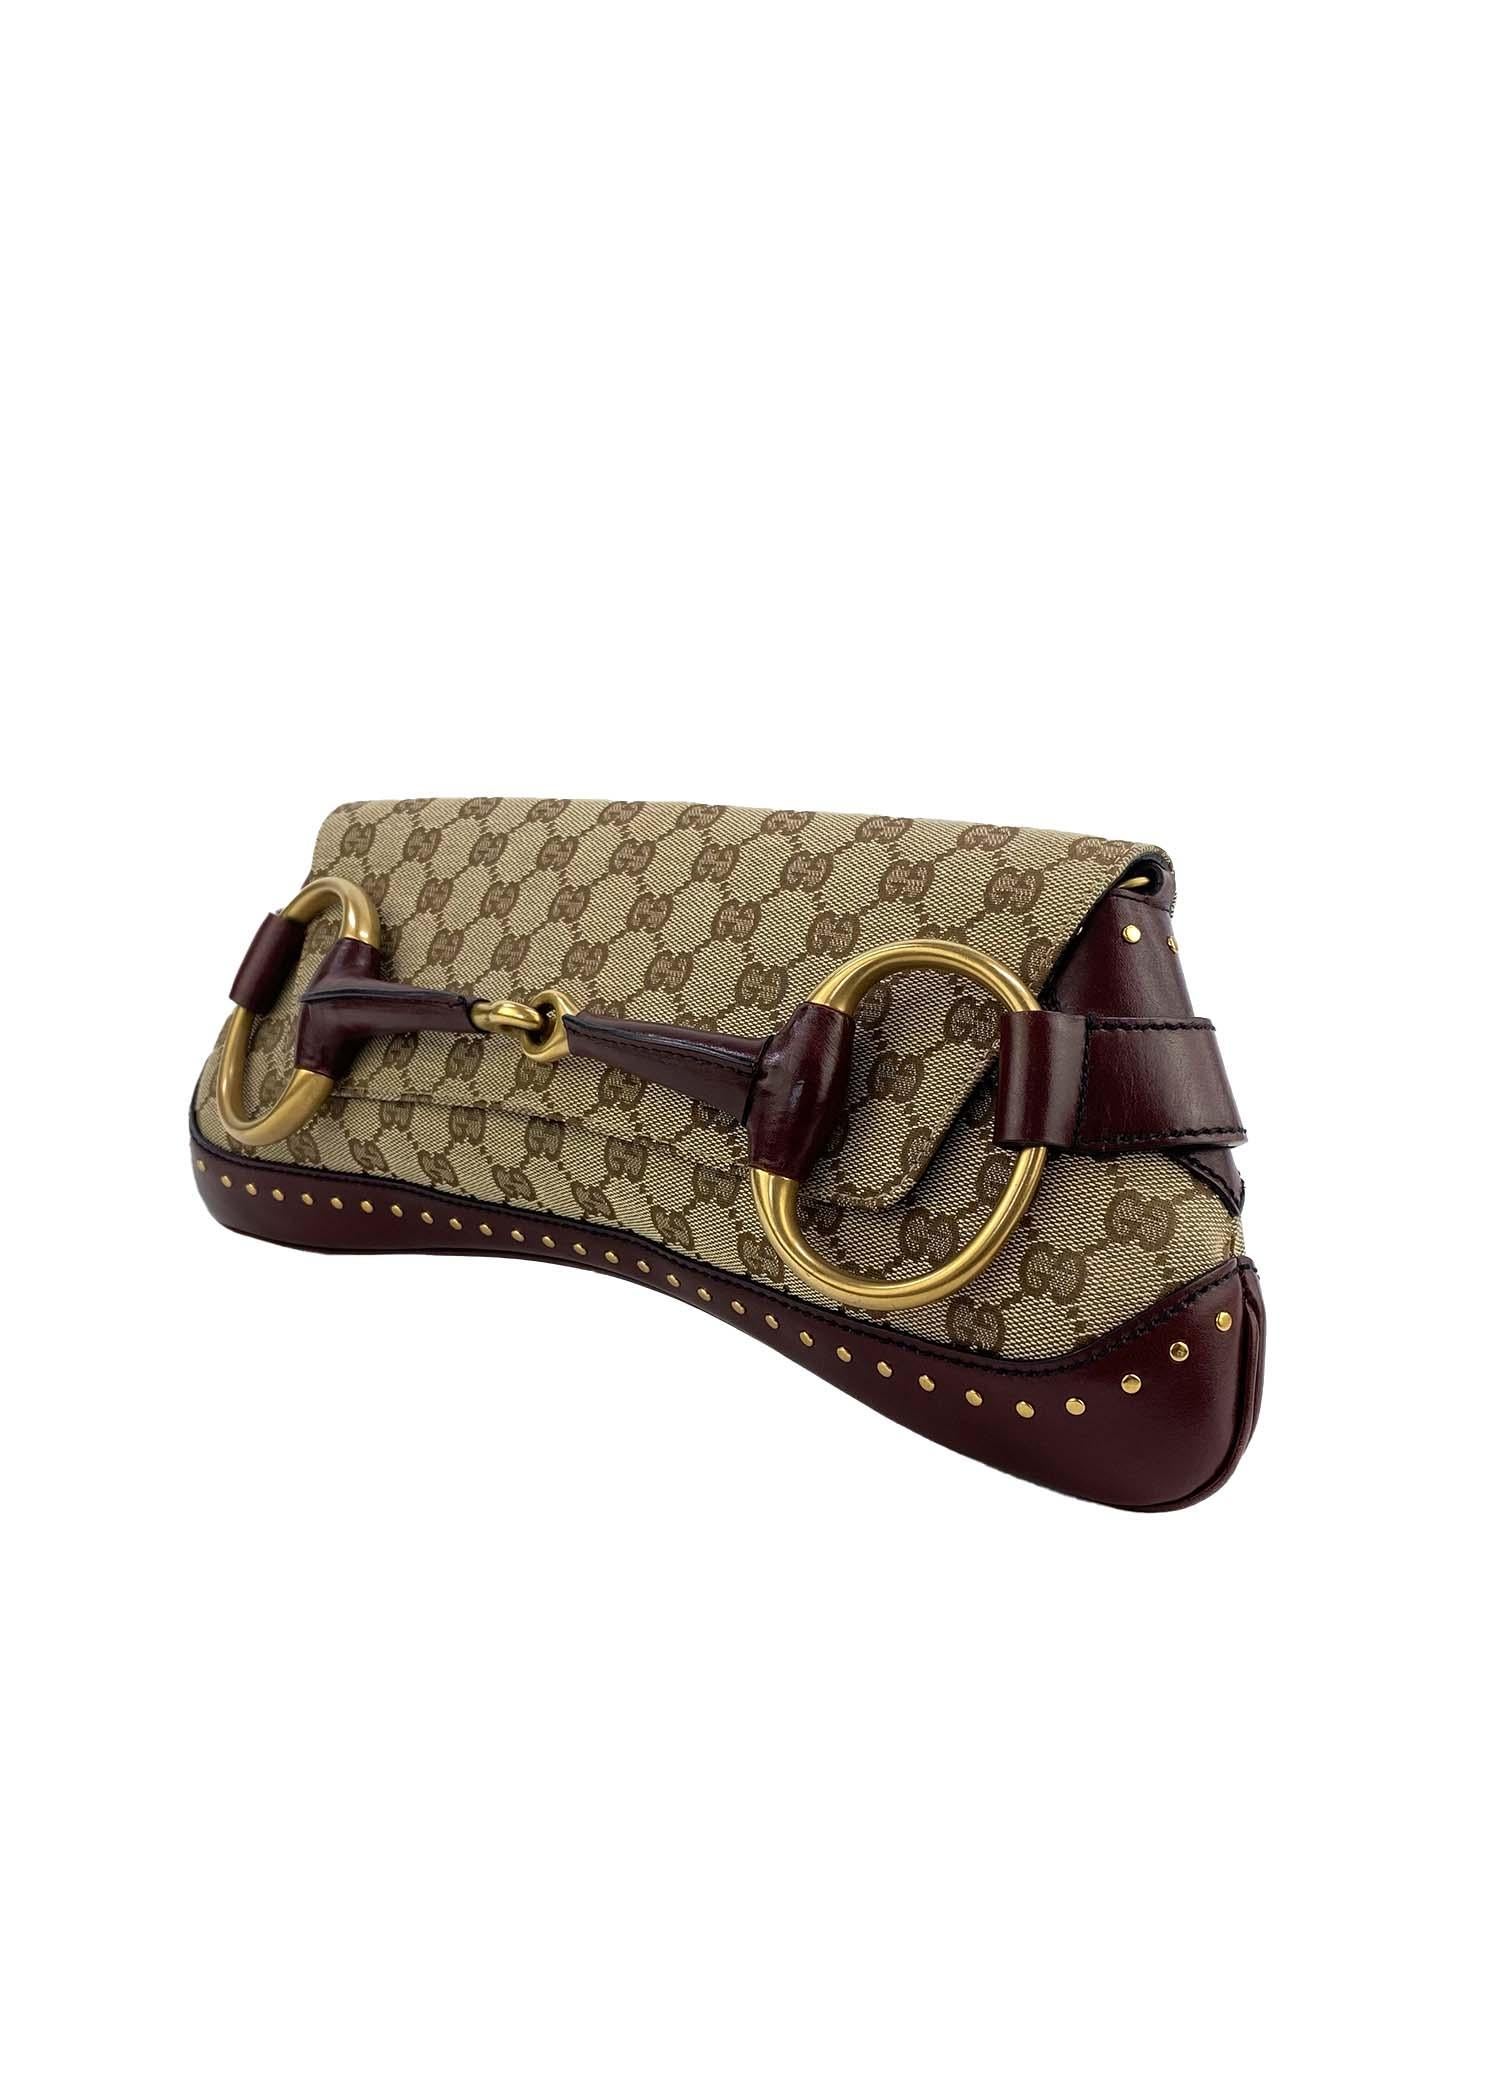 Black F/W 2003 Gucci by Tom Ford Studded GG Burgundy Large Horsebit Convertible Clutch